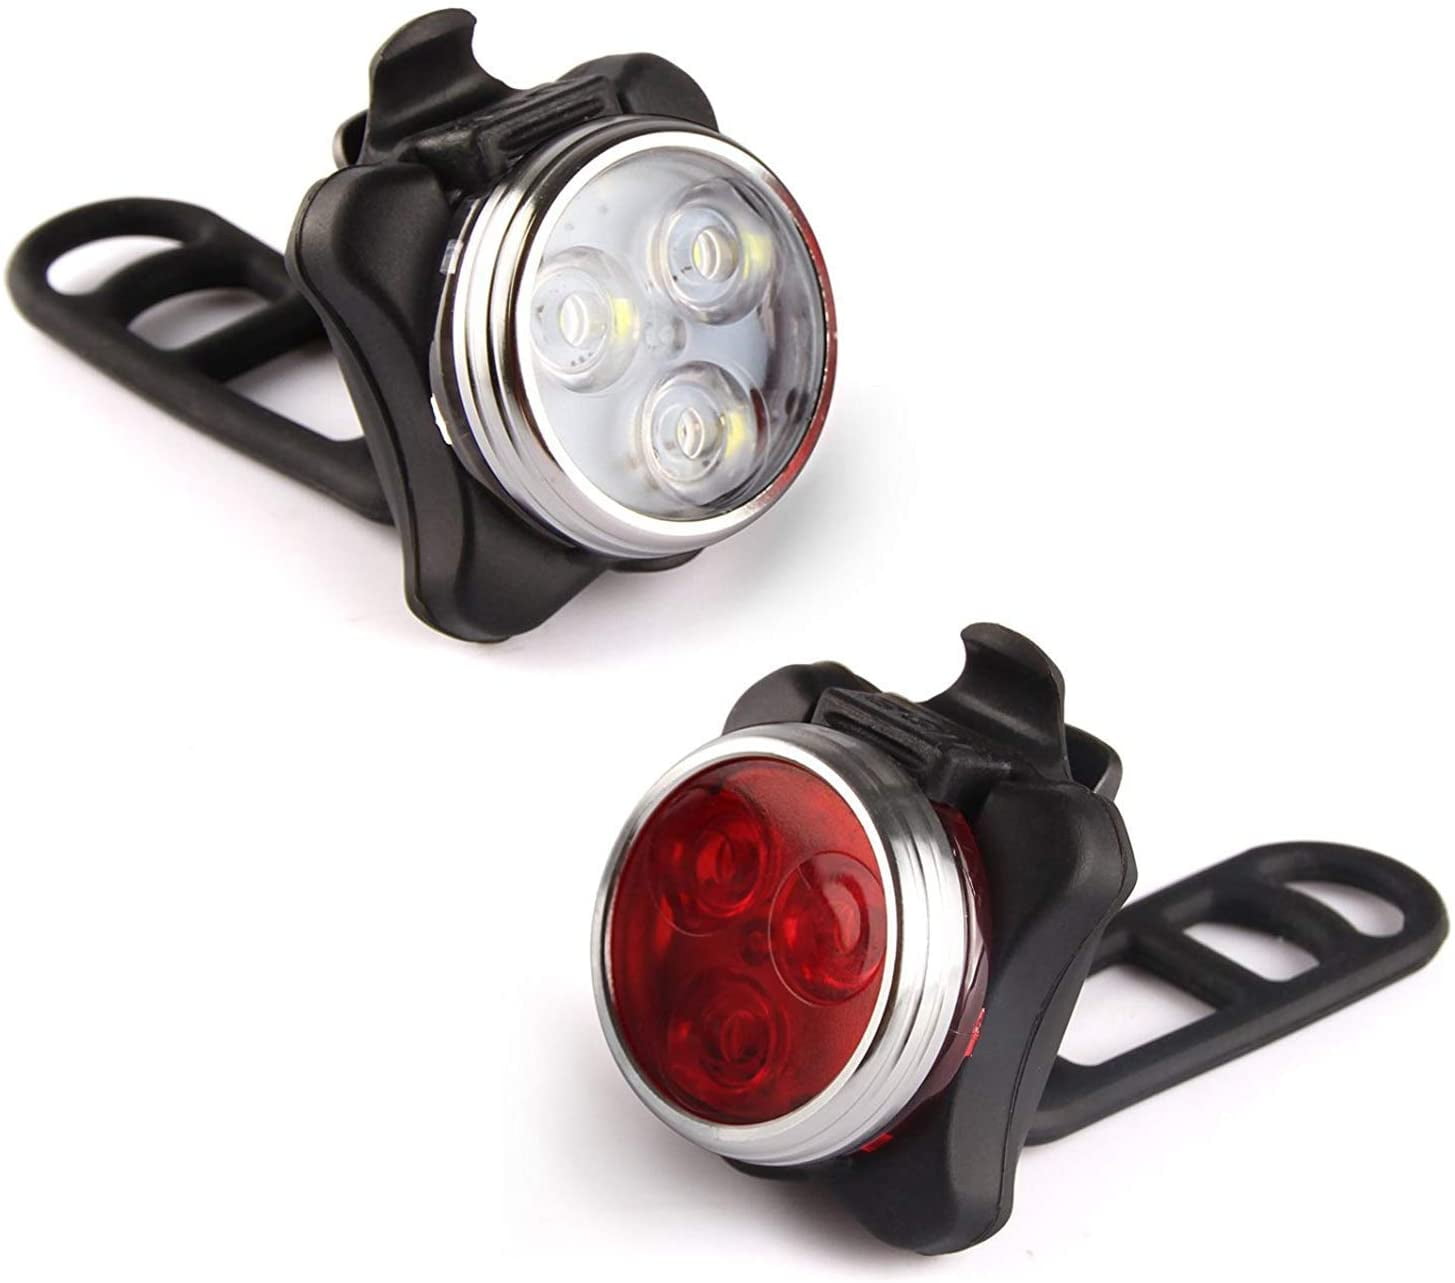 2Pcs Silicone Bicycle Bike Cycle Safety LED Head Front & Rear Tail Light Set  WF 